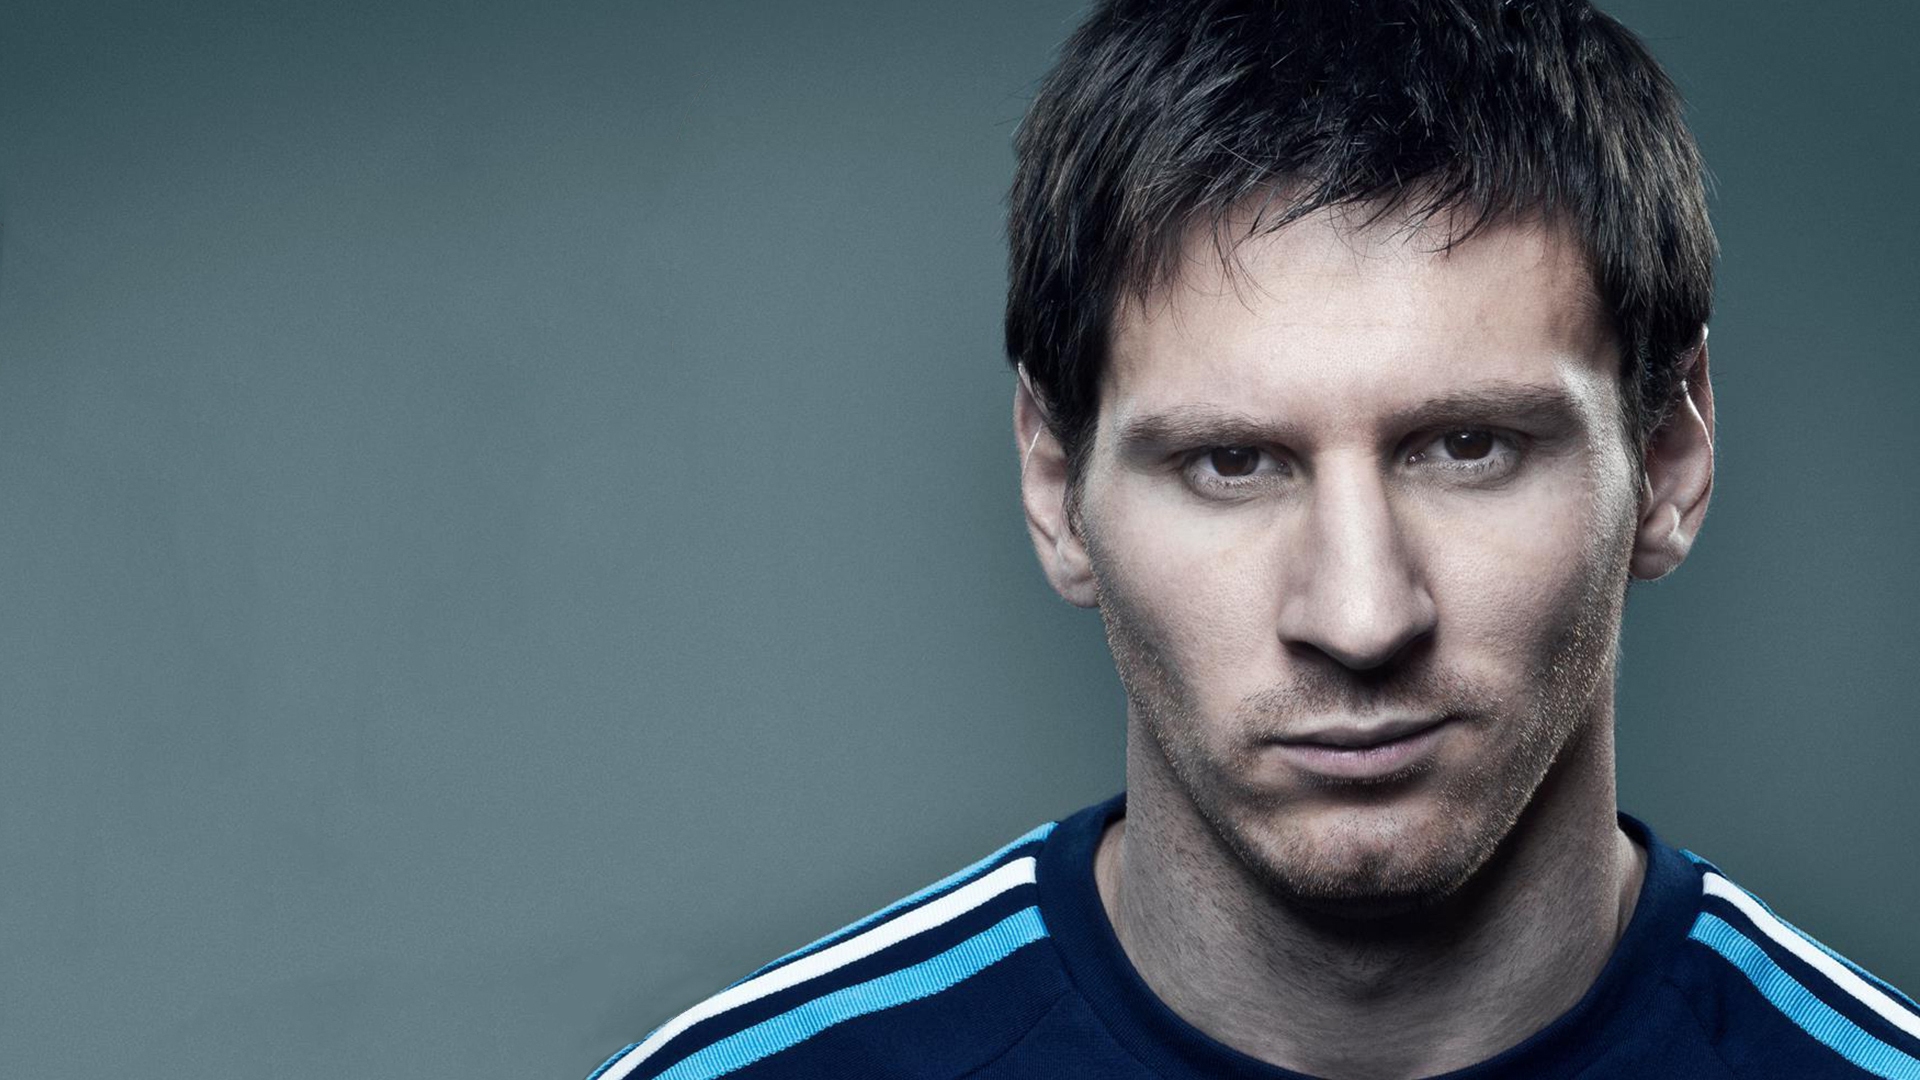 Messi Pose for 1920 x 1080 HDTV 1080p resolution